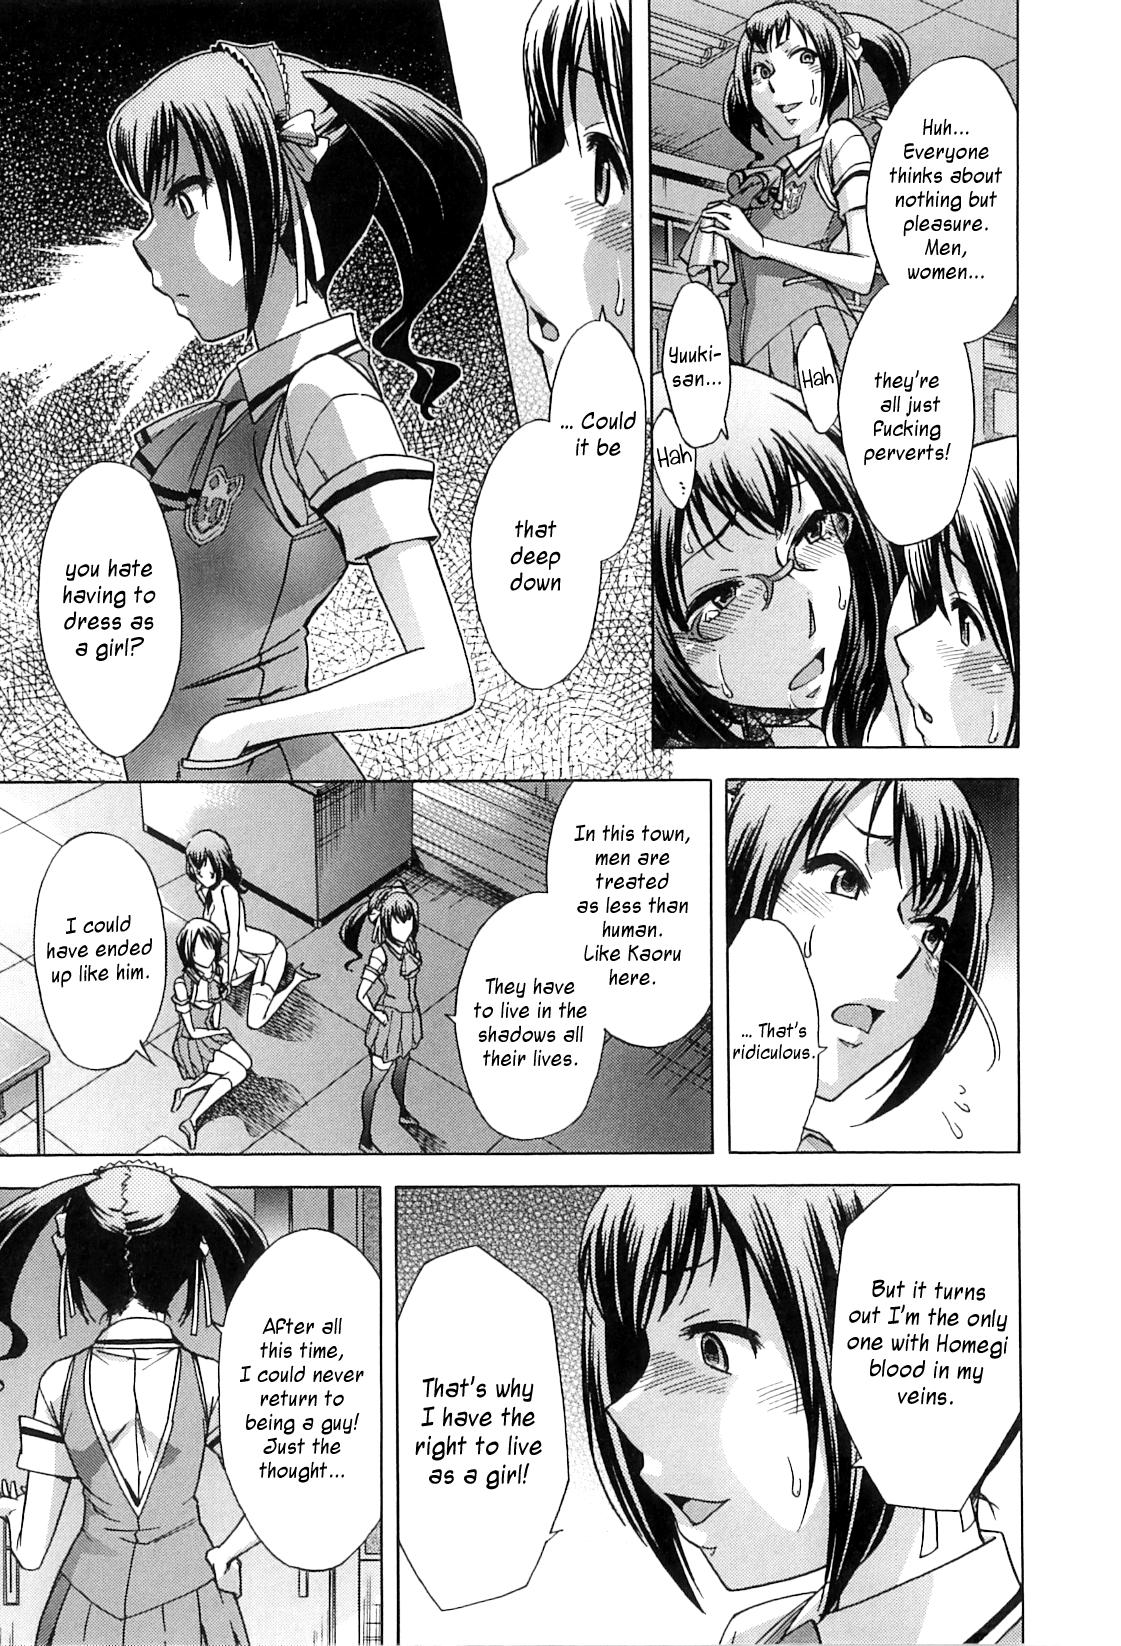 After School Tin Time chapter 1-4 32